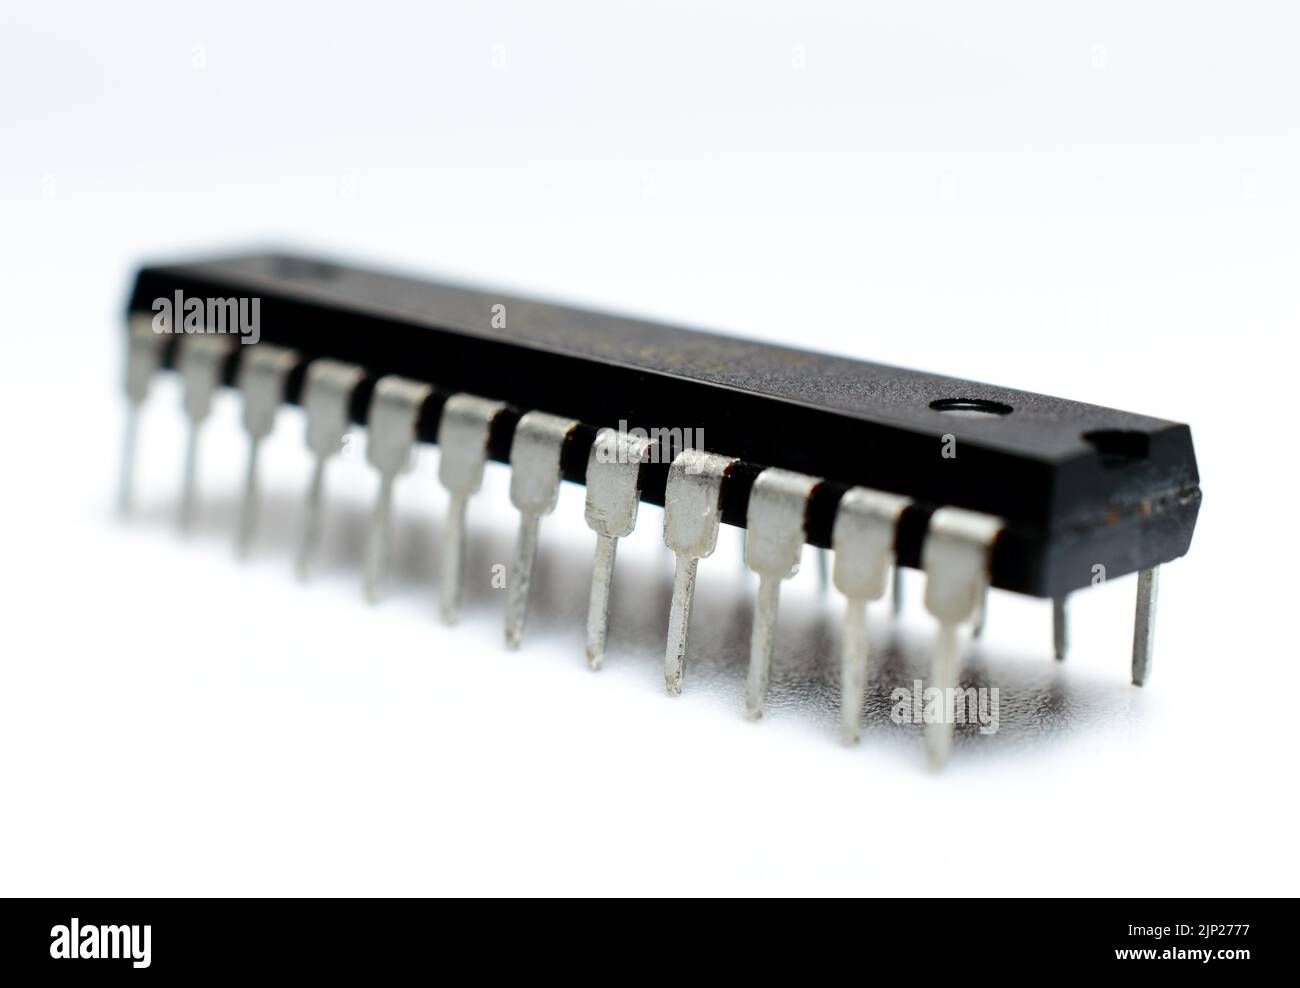 Black microchip with metal legs on a white background. Microcircuit, silicon chip. Macro photo. Part of a computer motherboard. Stock Photo